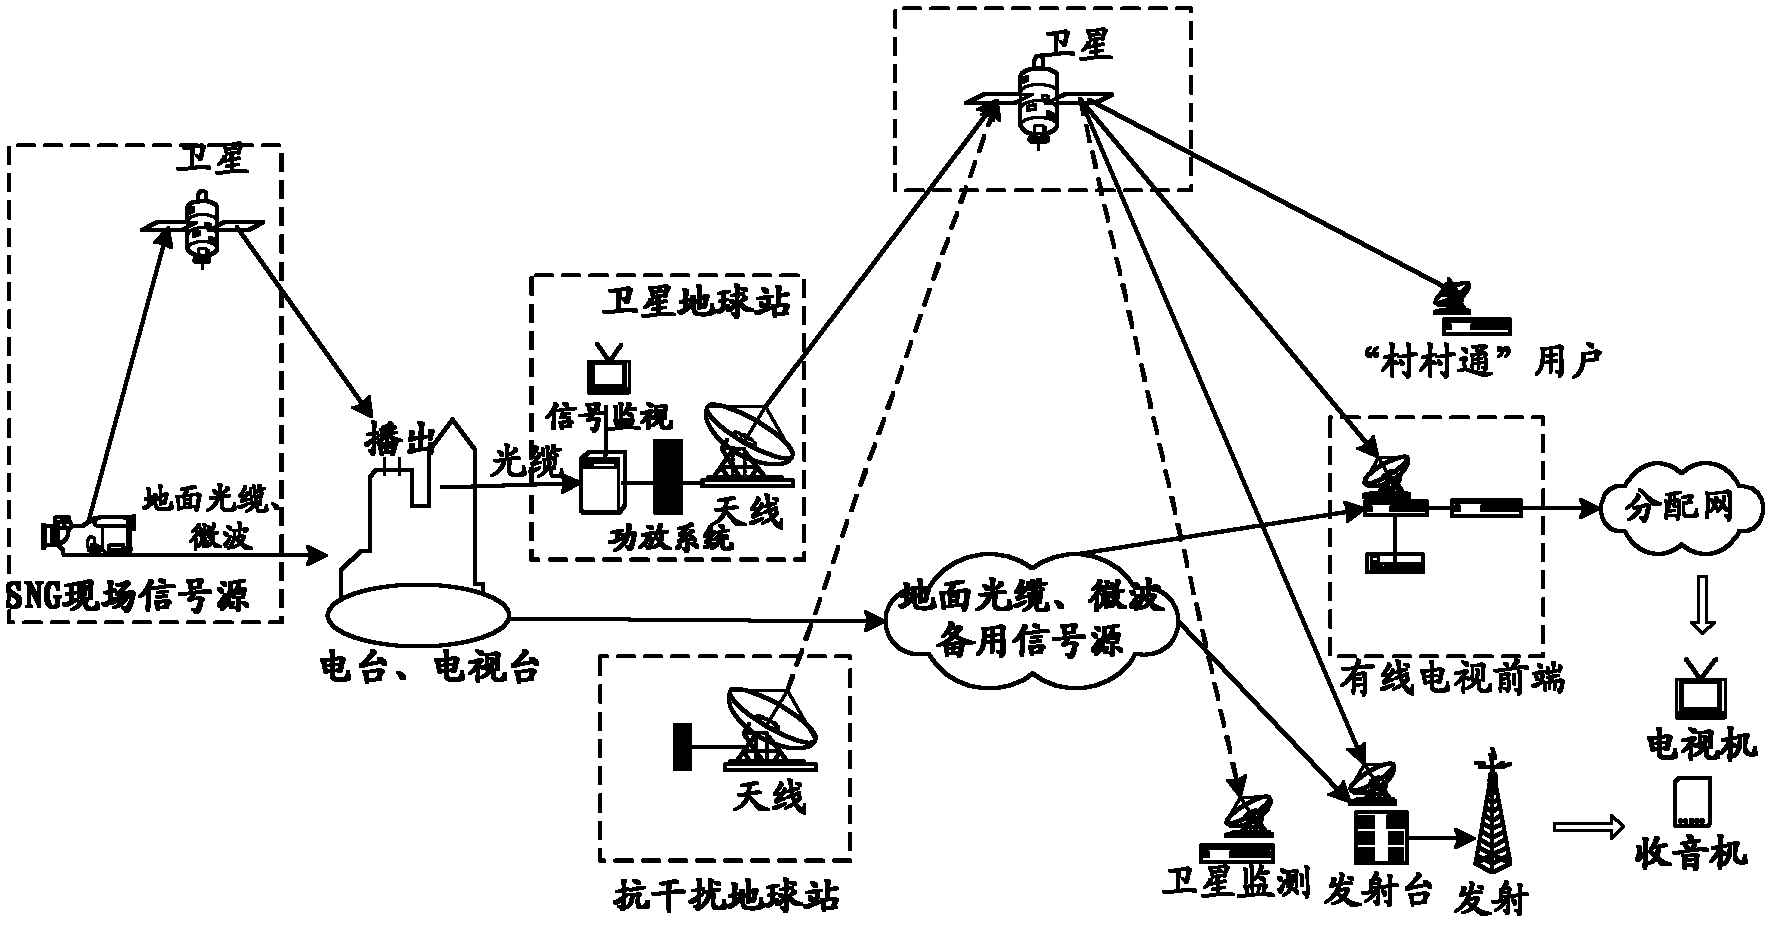 A radio and television information security evaluation system